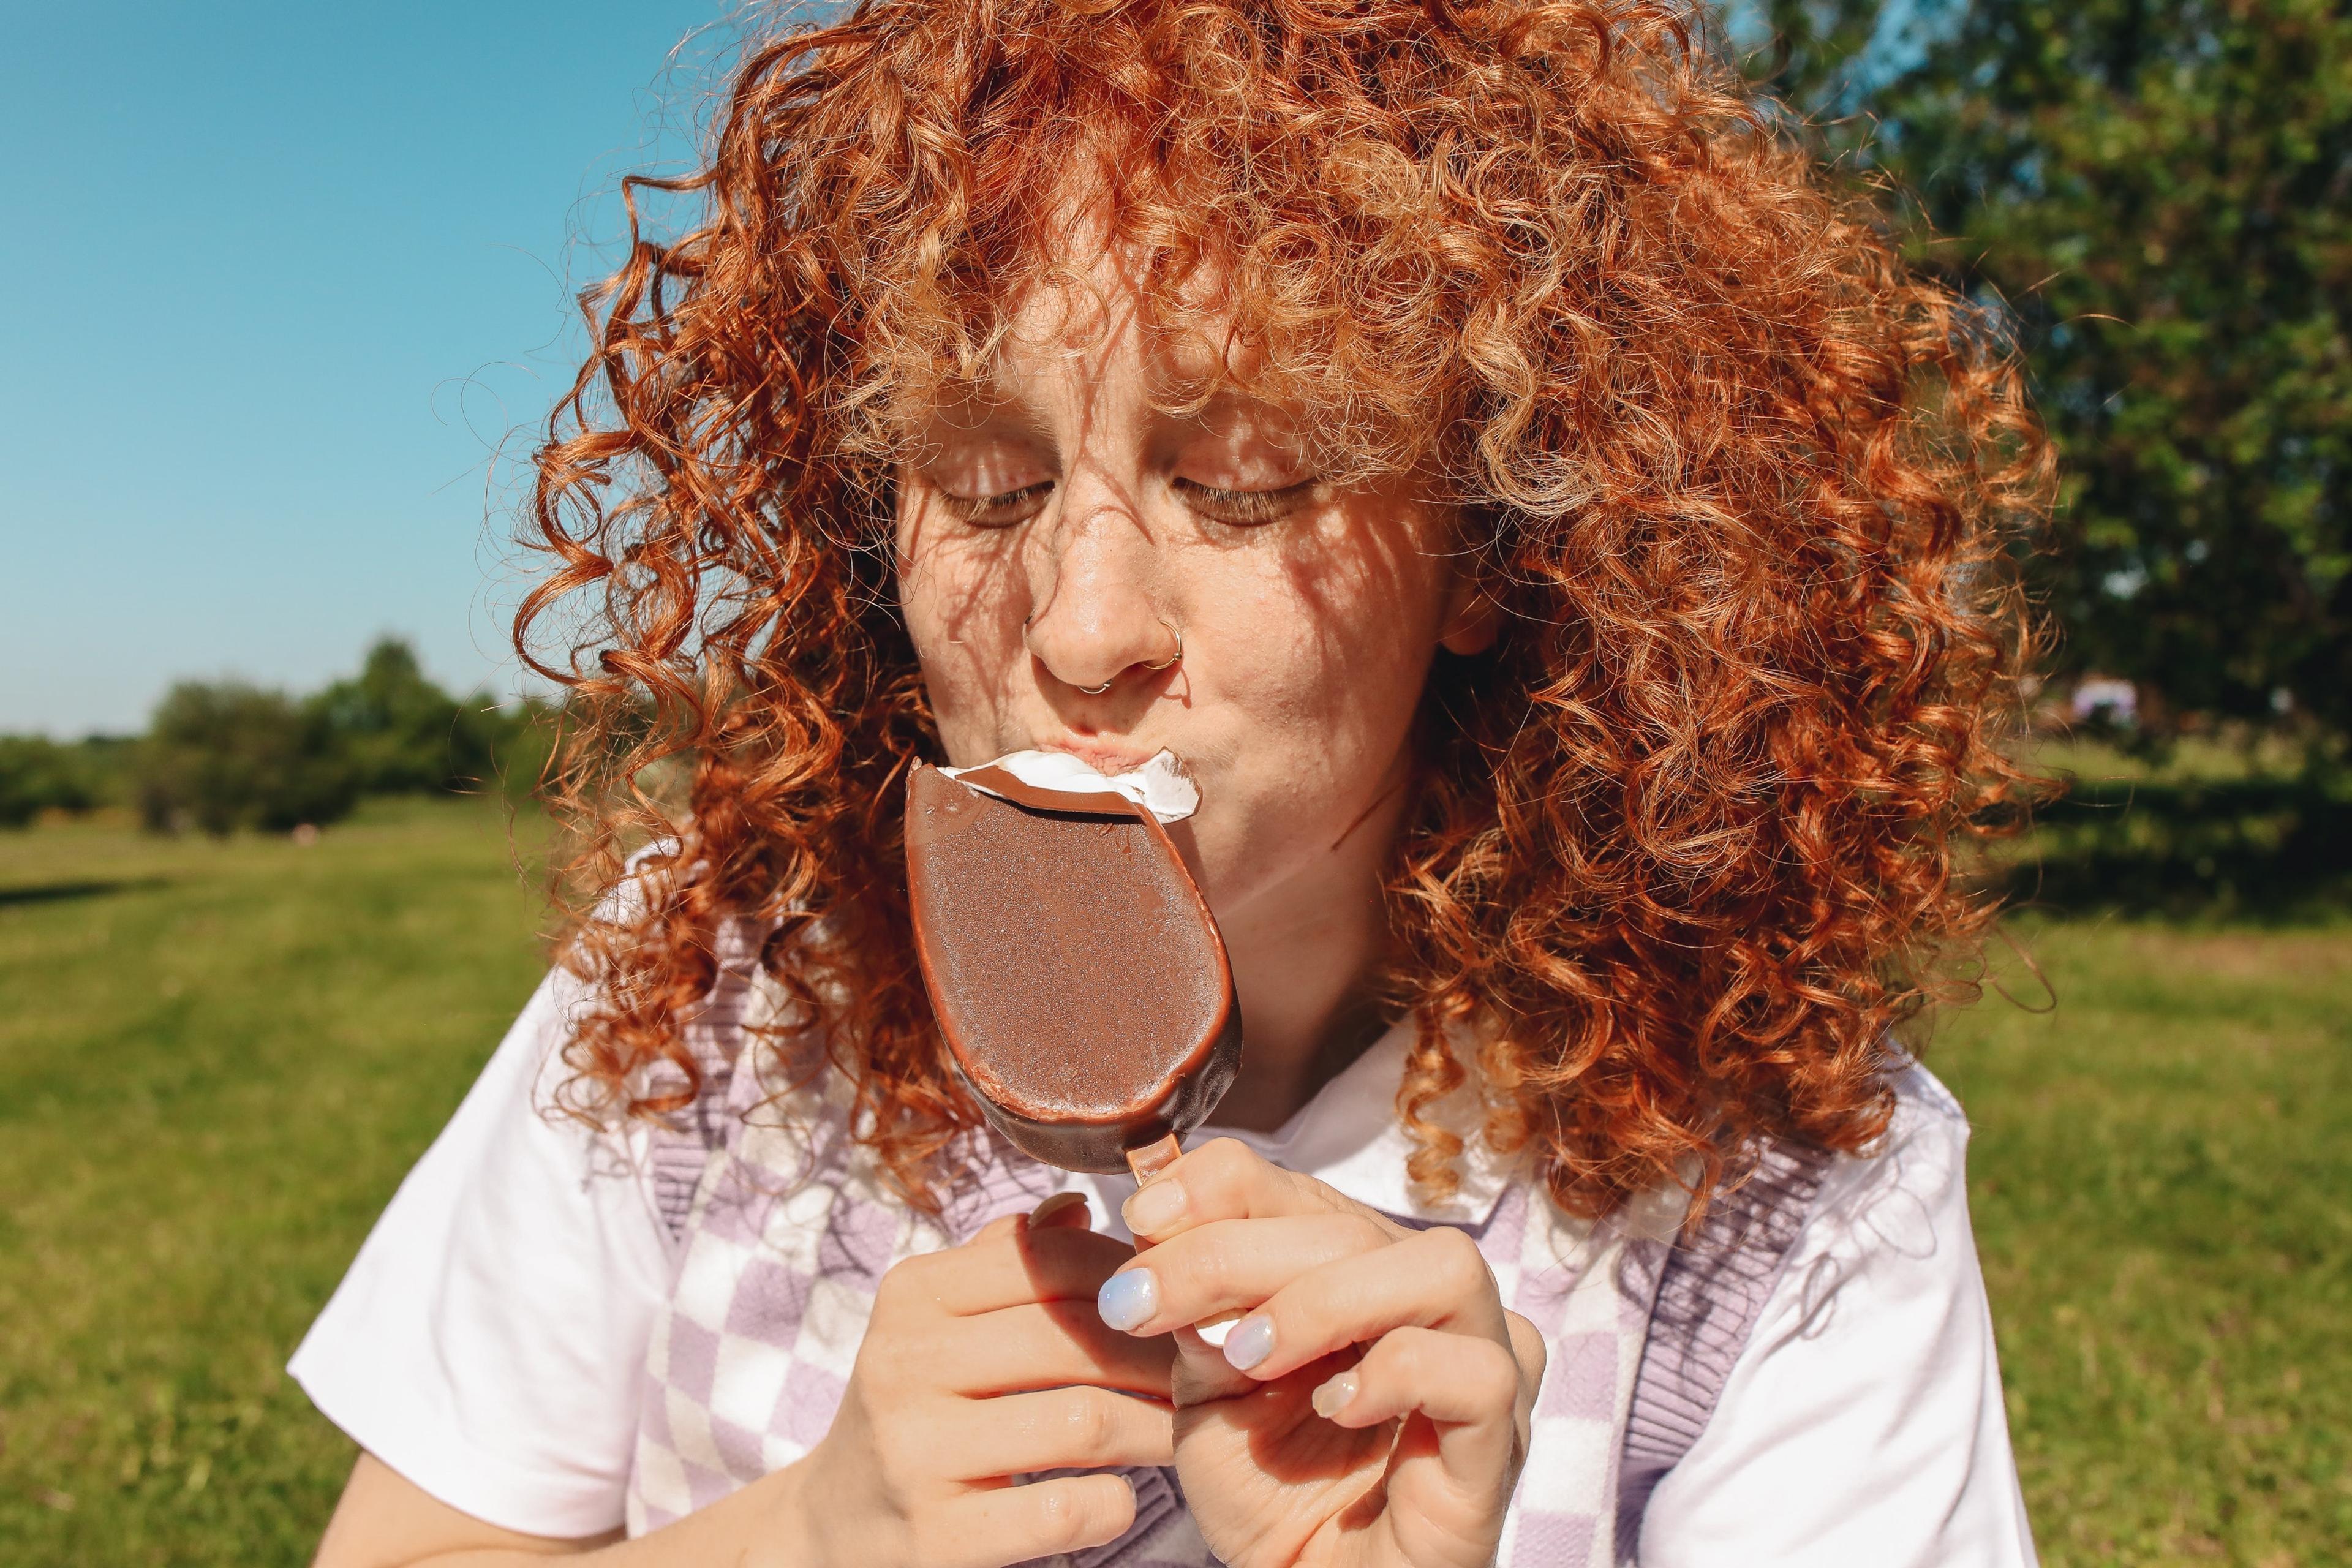 A woman with red curly hair eats an ice cream treat outside in the sun